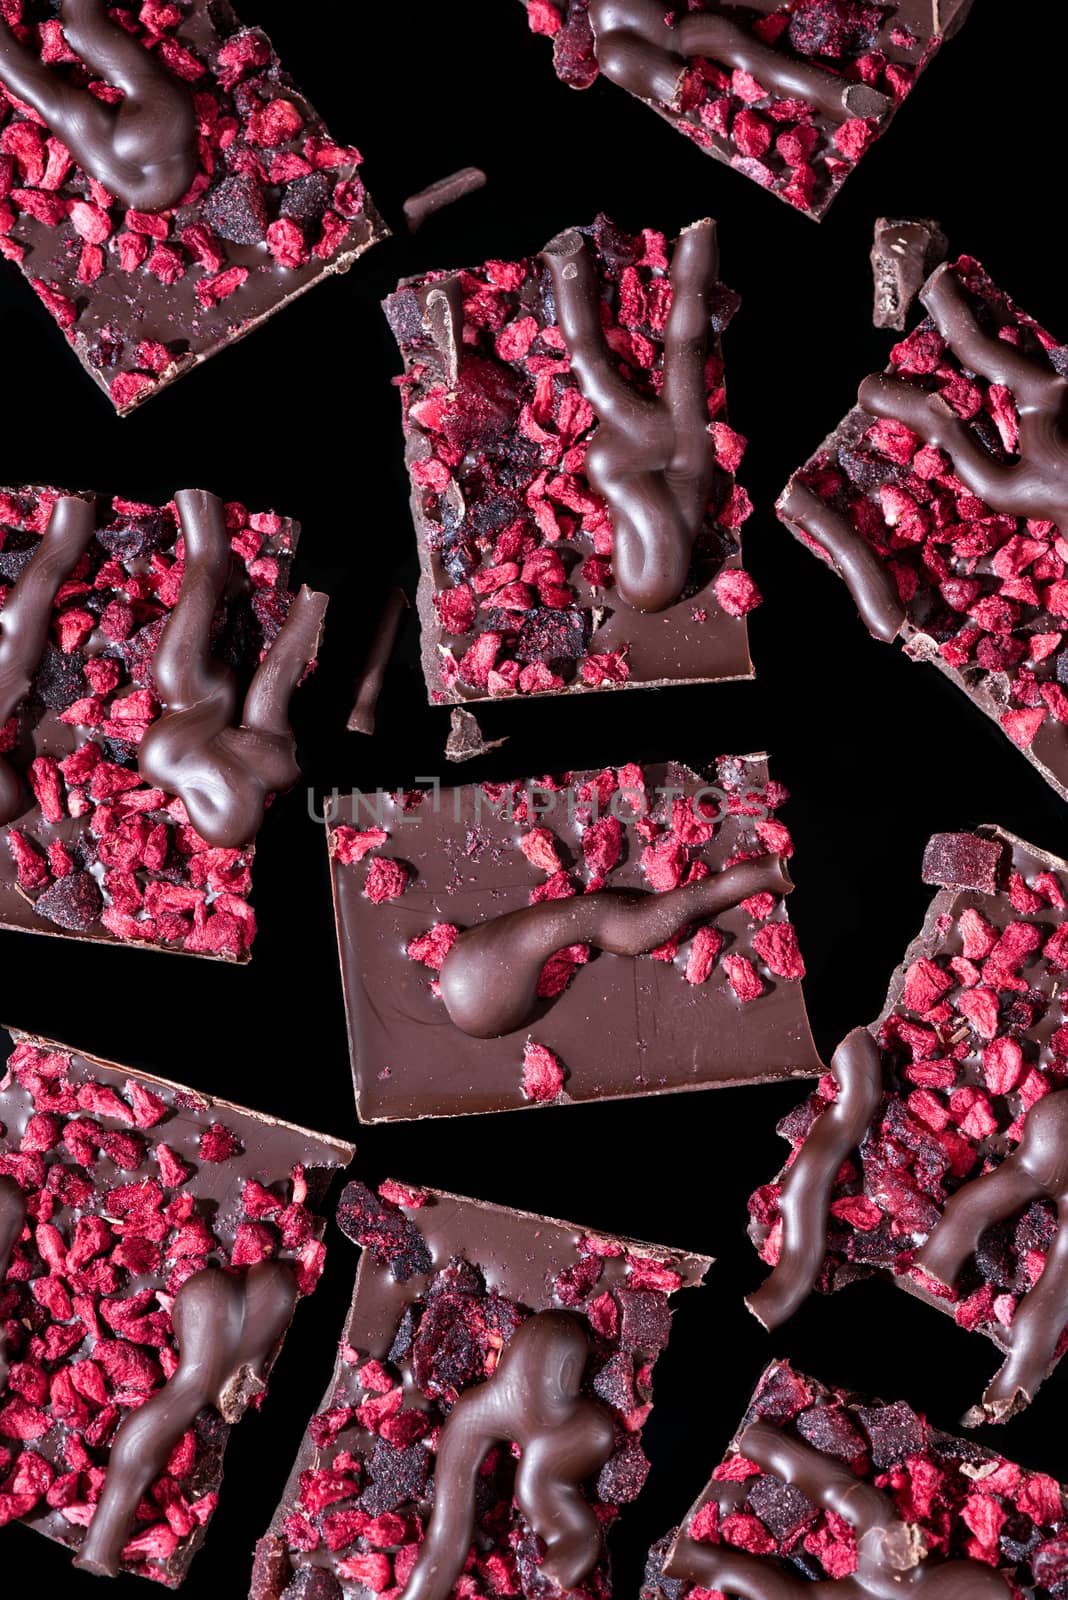 Broken Pieces of Chocolate Bar on Dark Background. Close Up View by merc67